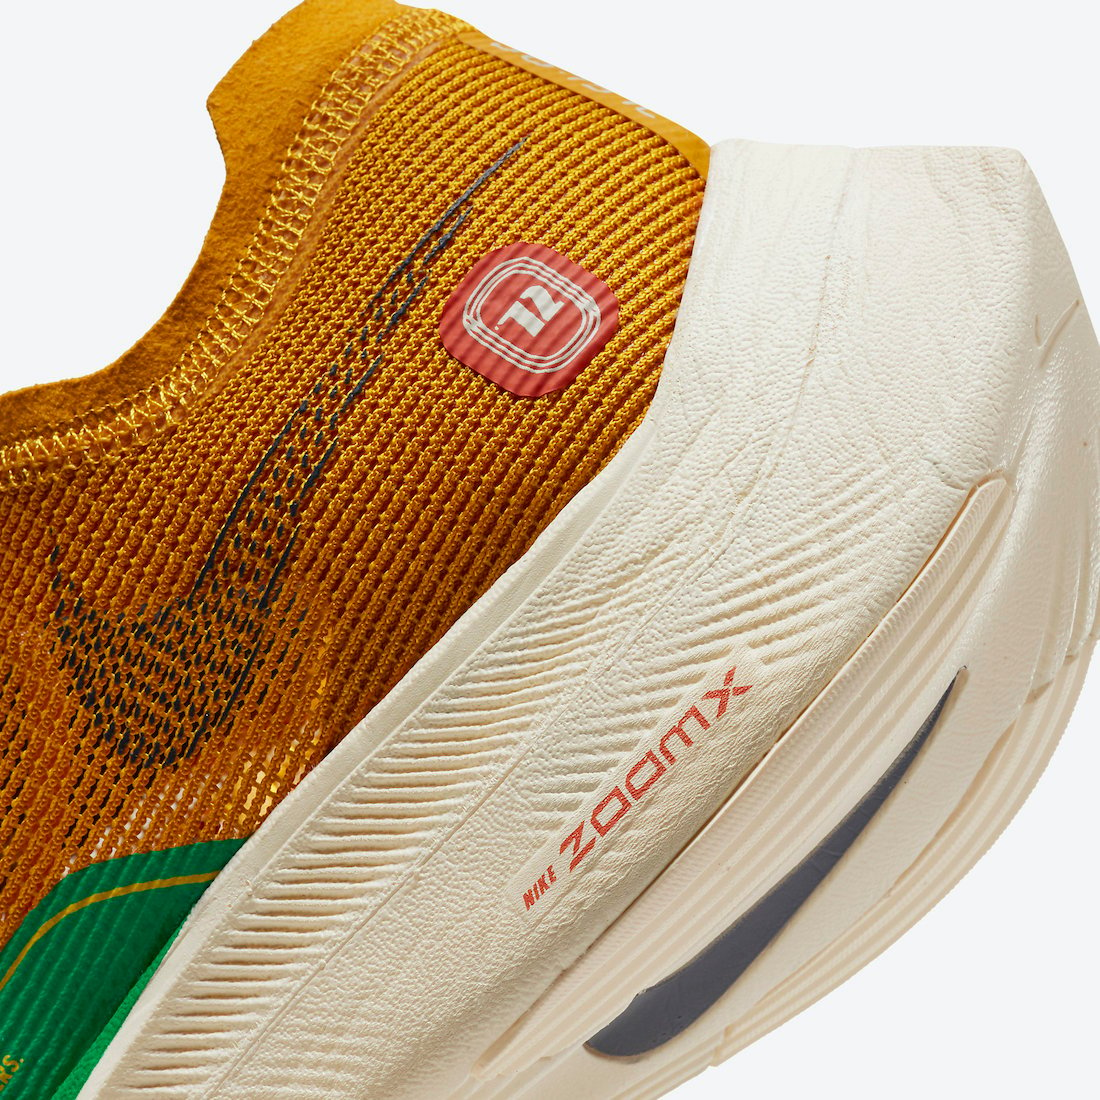 Nike ZoomX VaporFly NEXT% 2 72 Gold Green Red DJ5182-700 Release Date Info